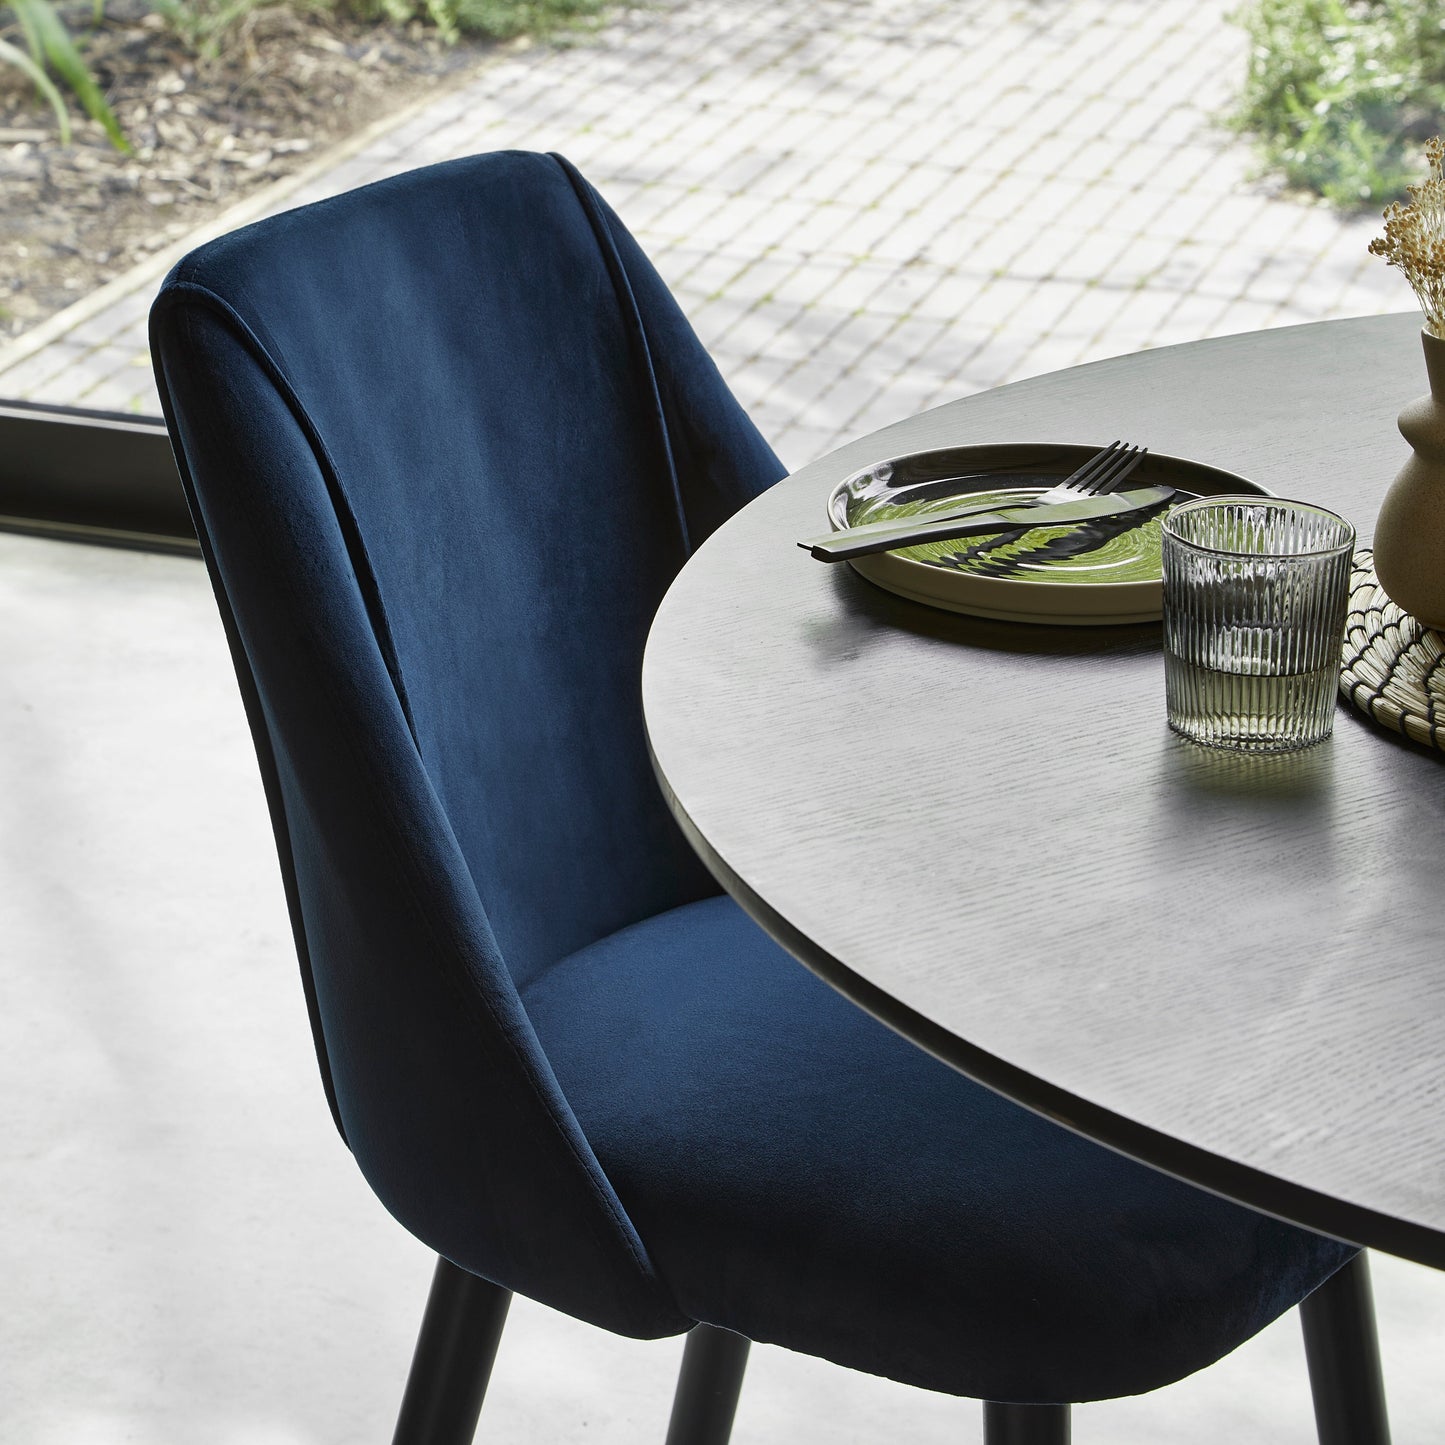 Willow 4 Seater Black Dining Table Set - Freya Blue Dining Chairs with Black Legs - Laura James